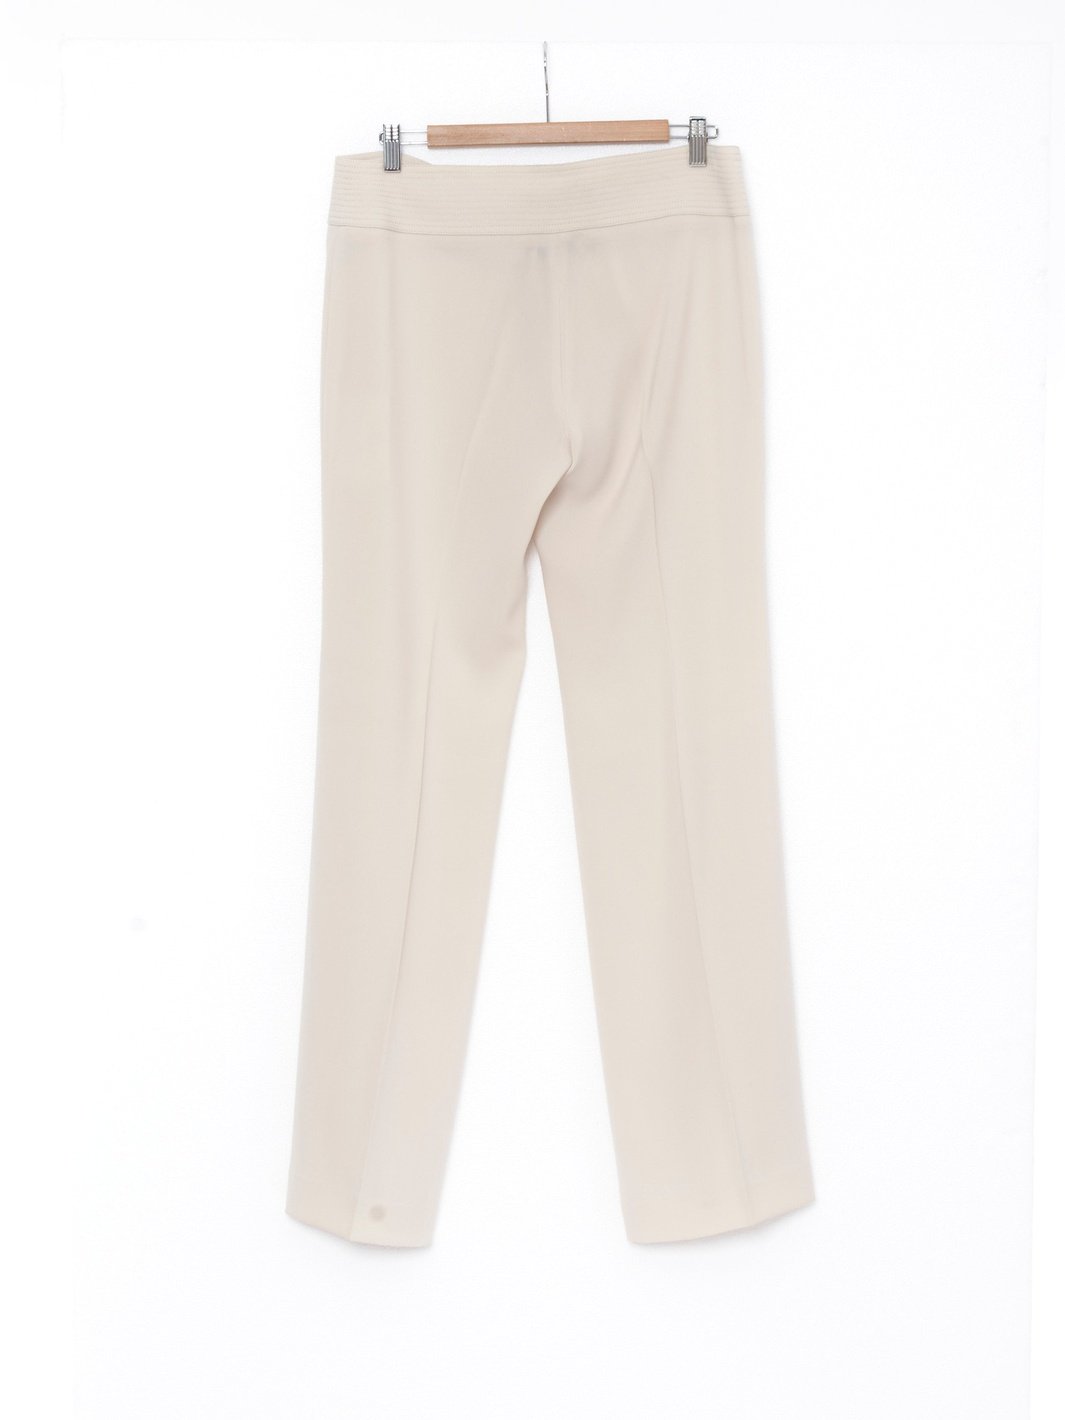 Y2K Ter et Bantine ivory-colored palazzo pants